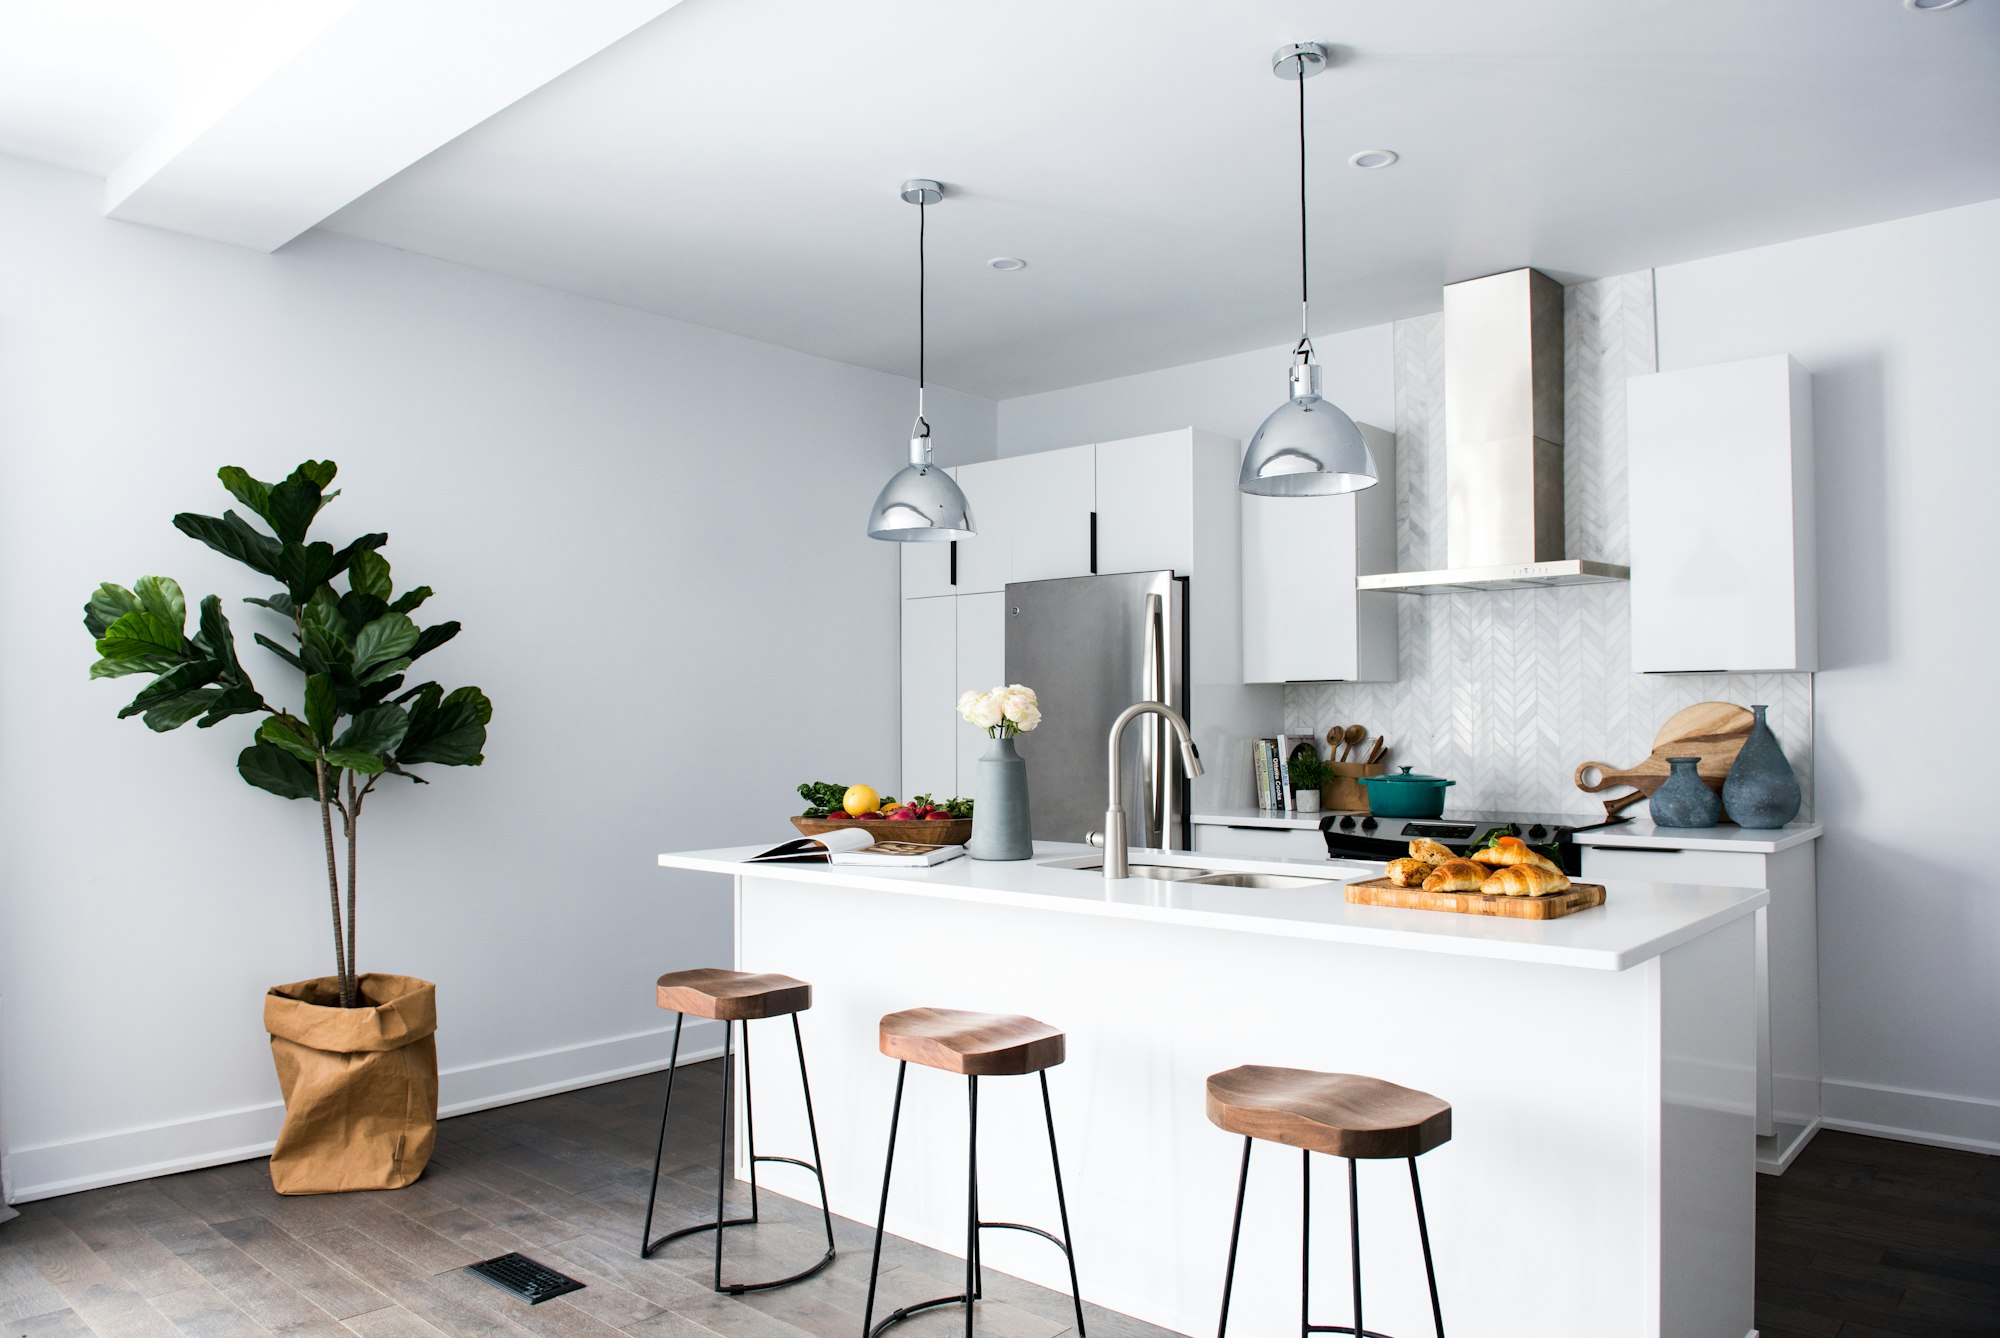 A bright, white, empty kitchen scene with wooden stools and a big green plant.